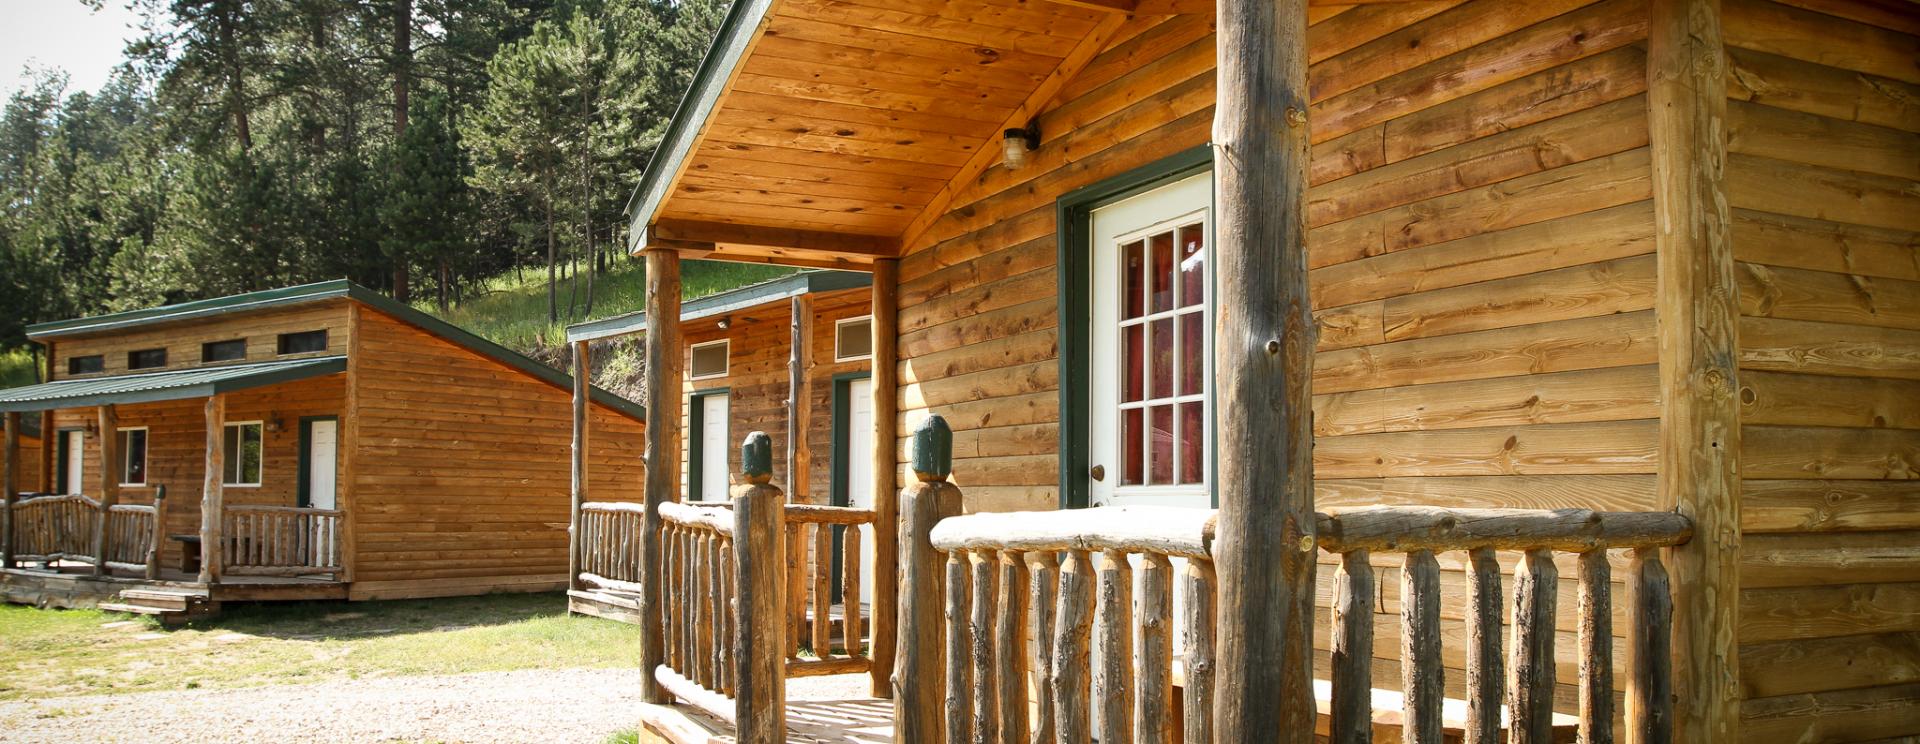 Cole Cabins - Deadwood, SD Hwy 385